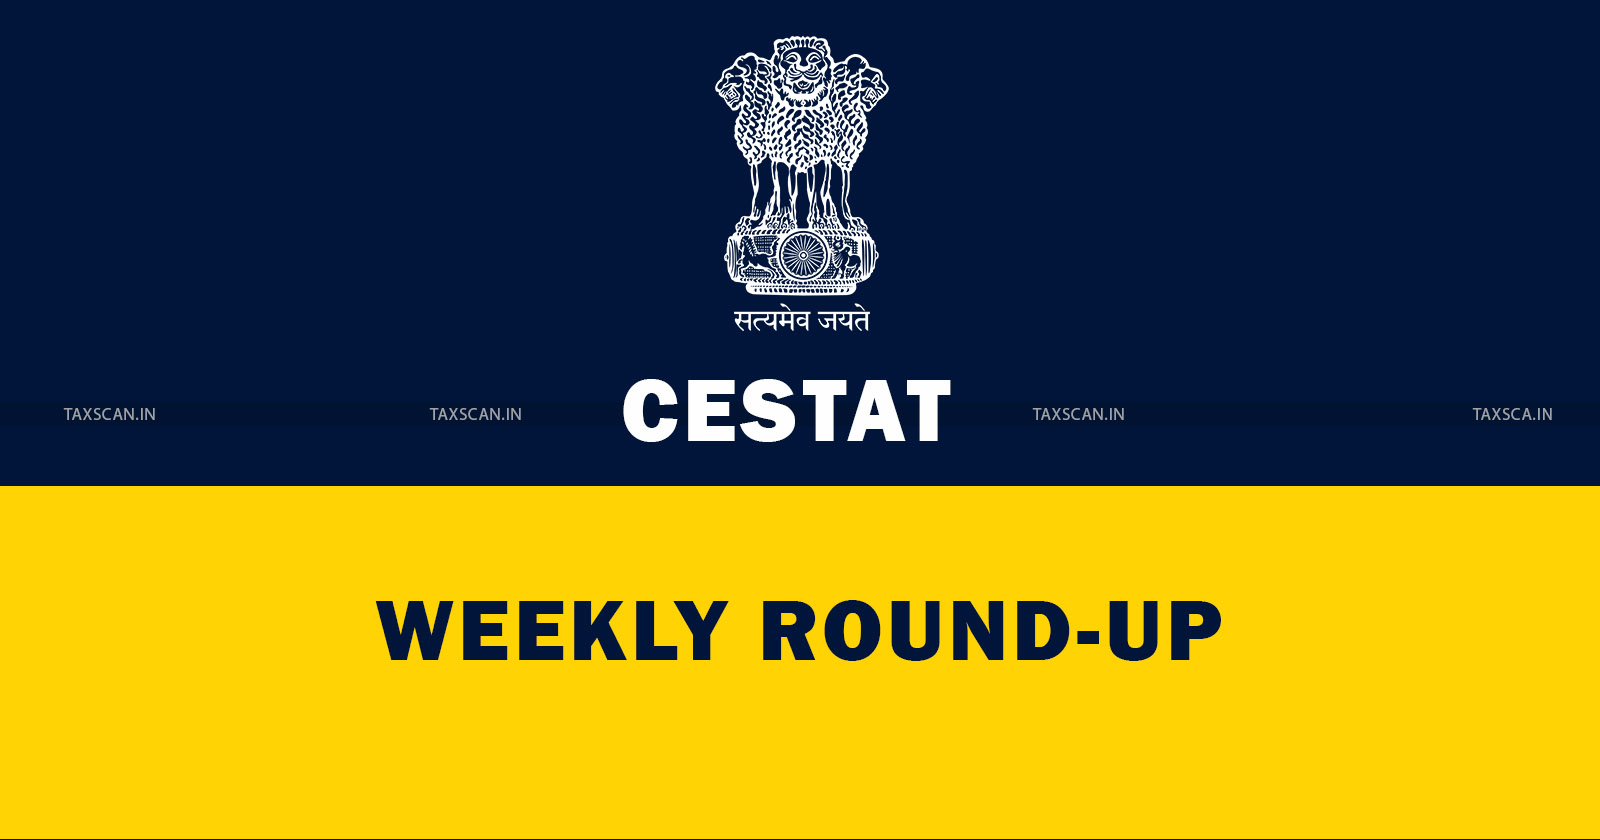 CESTAT - Weekly Round Up - TAXSCAN